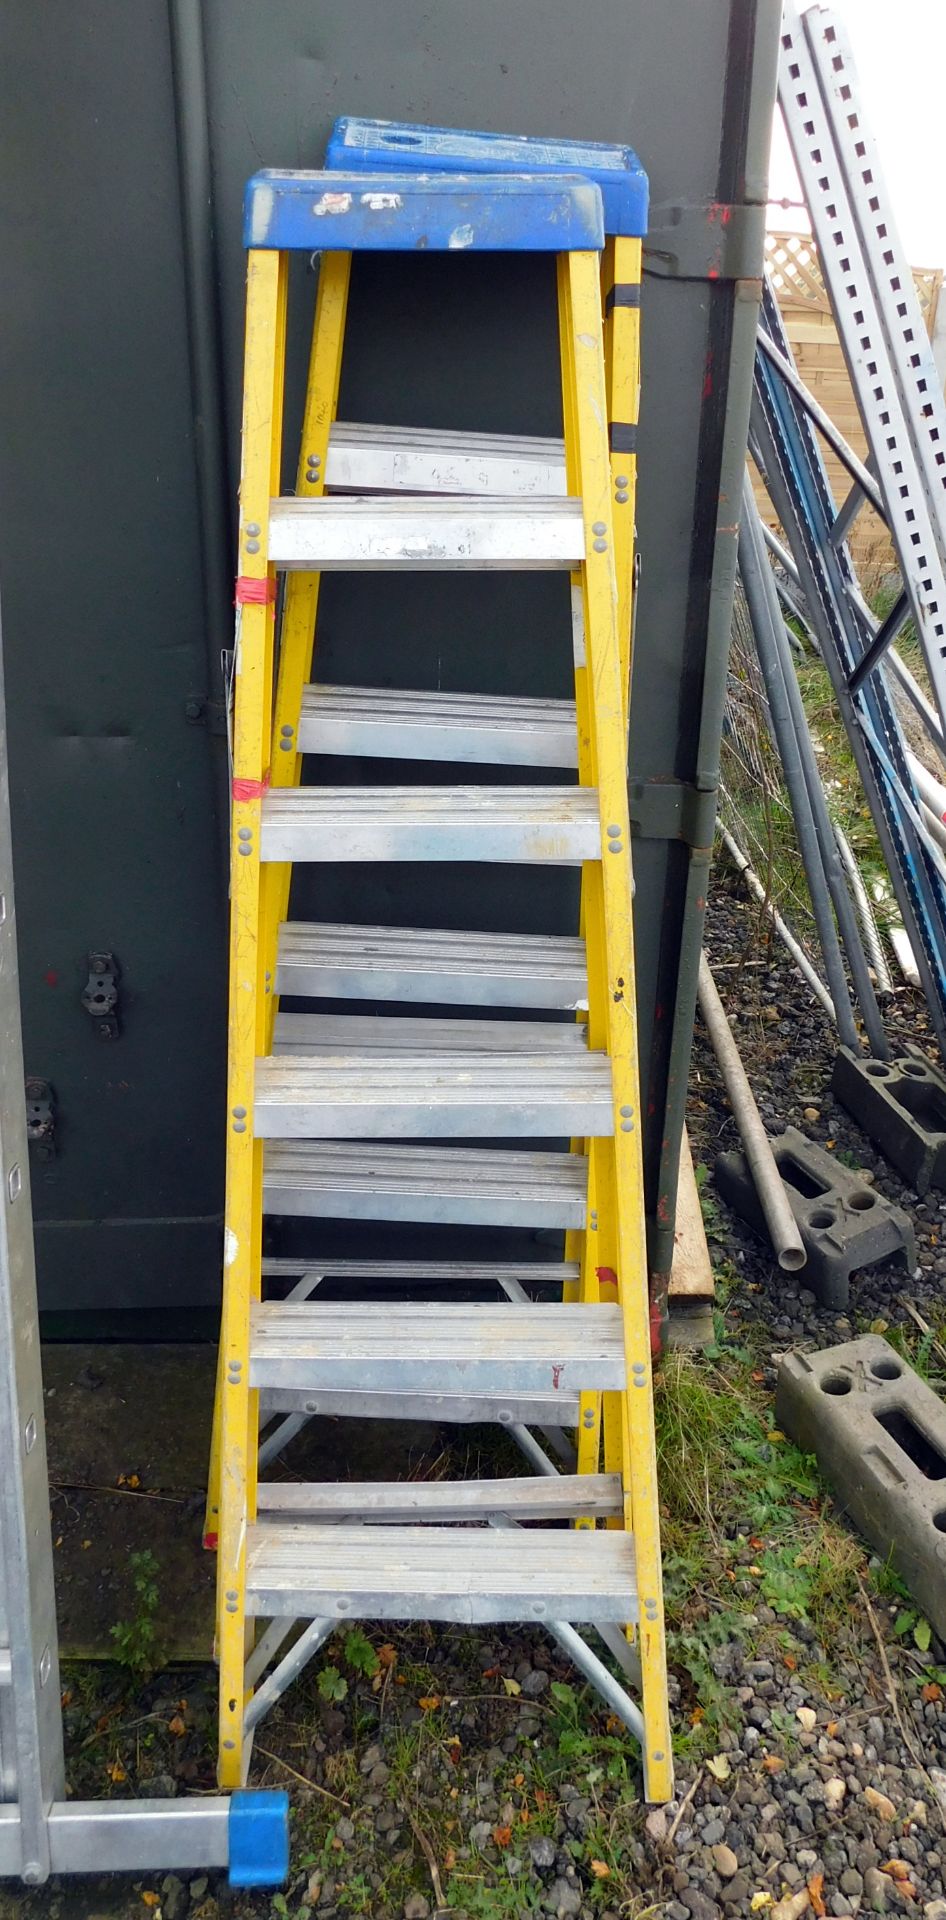 2 5-Tread Fibreglass Step Ladders (Located Upminster – See General Notes for Full Address)